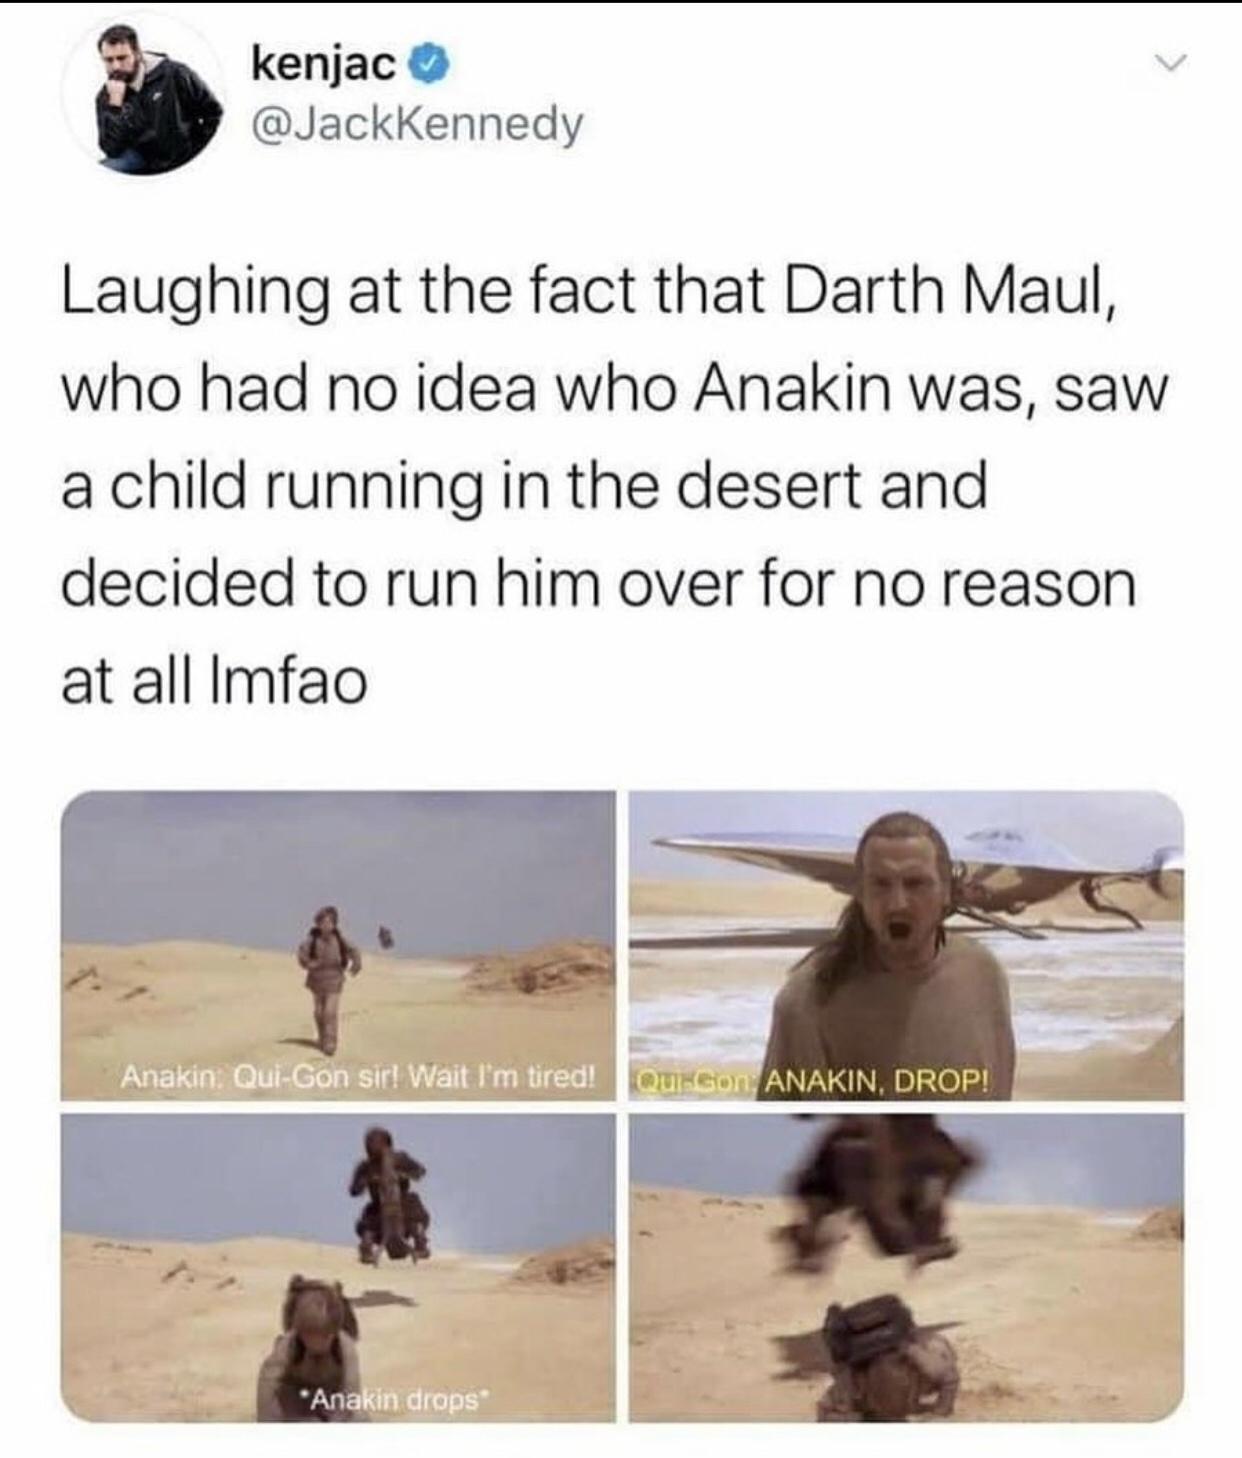 landscape - kenjac Laughing at the fact that Darth Maul, who had no idea who Anakin was, saw a child running in the desert and decided to run him over for no reason at all Imfao Anakin. QuiGon sir! Wait I'm tired! Quego Anakin, Drop! Anakin drops